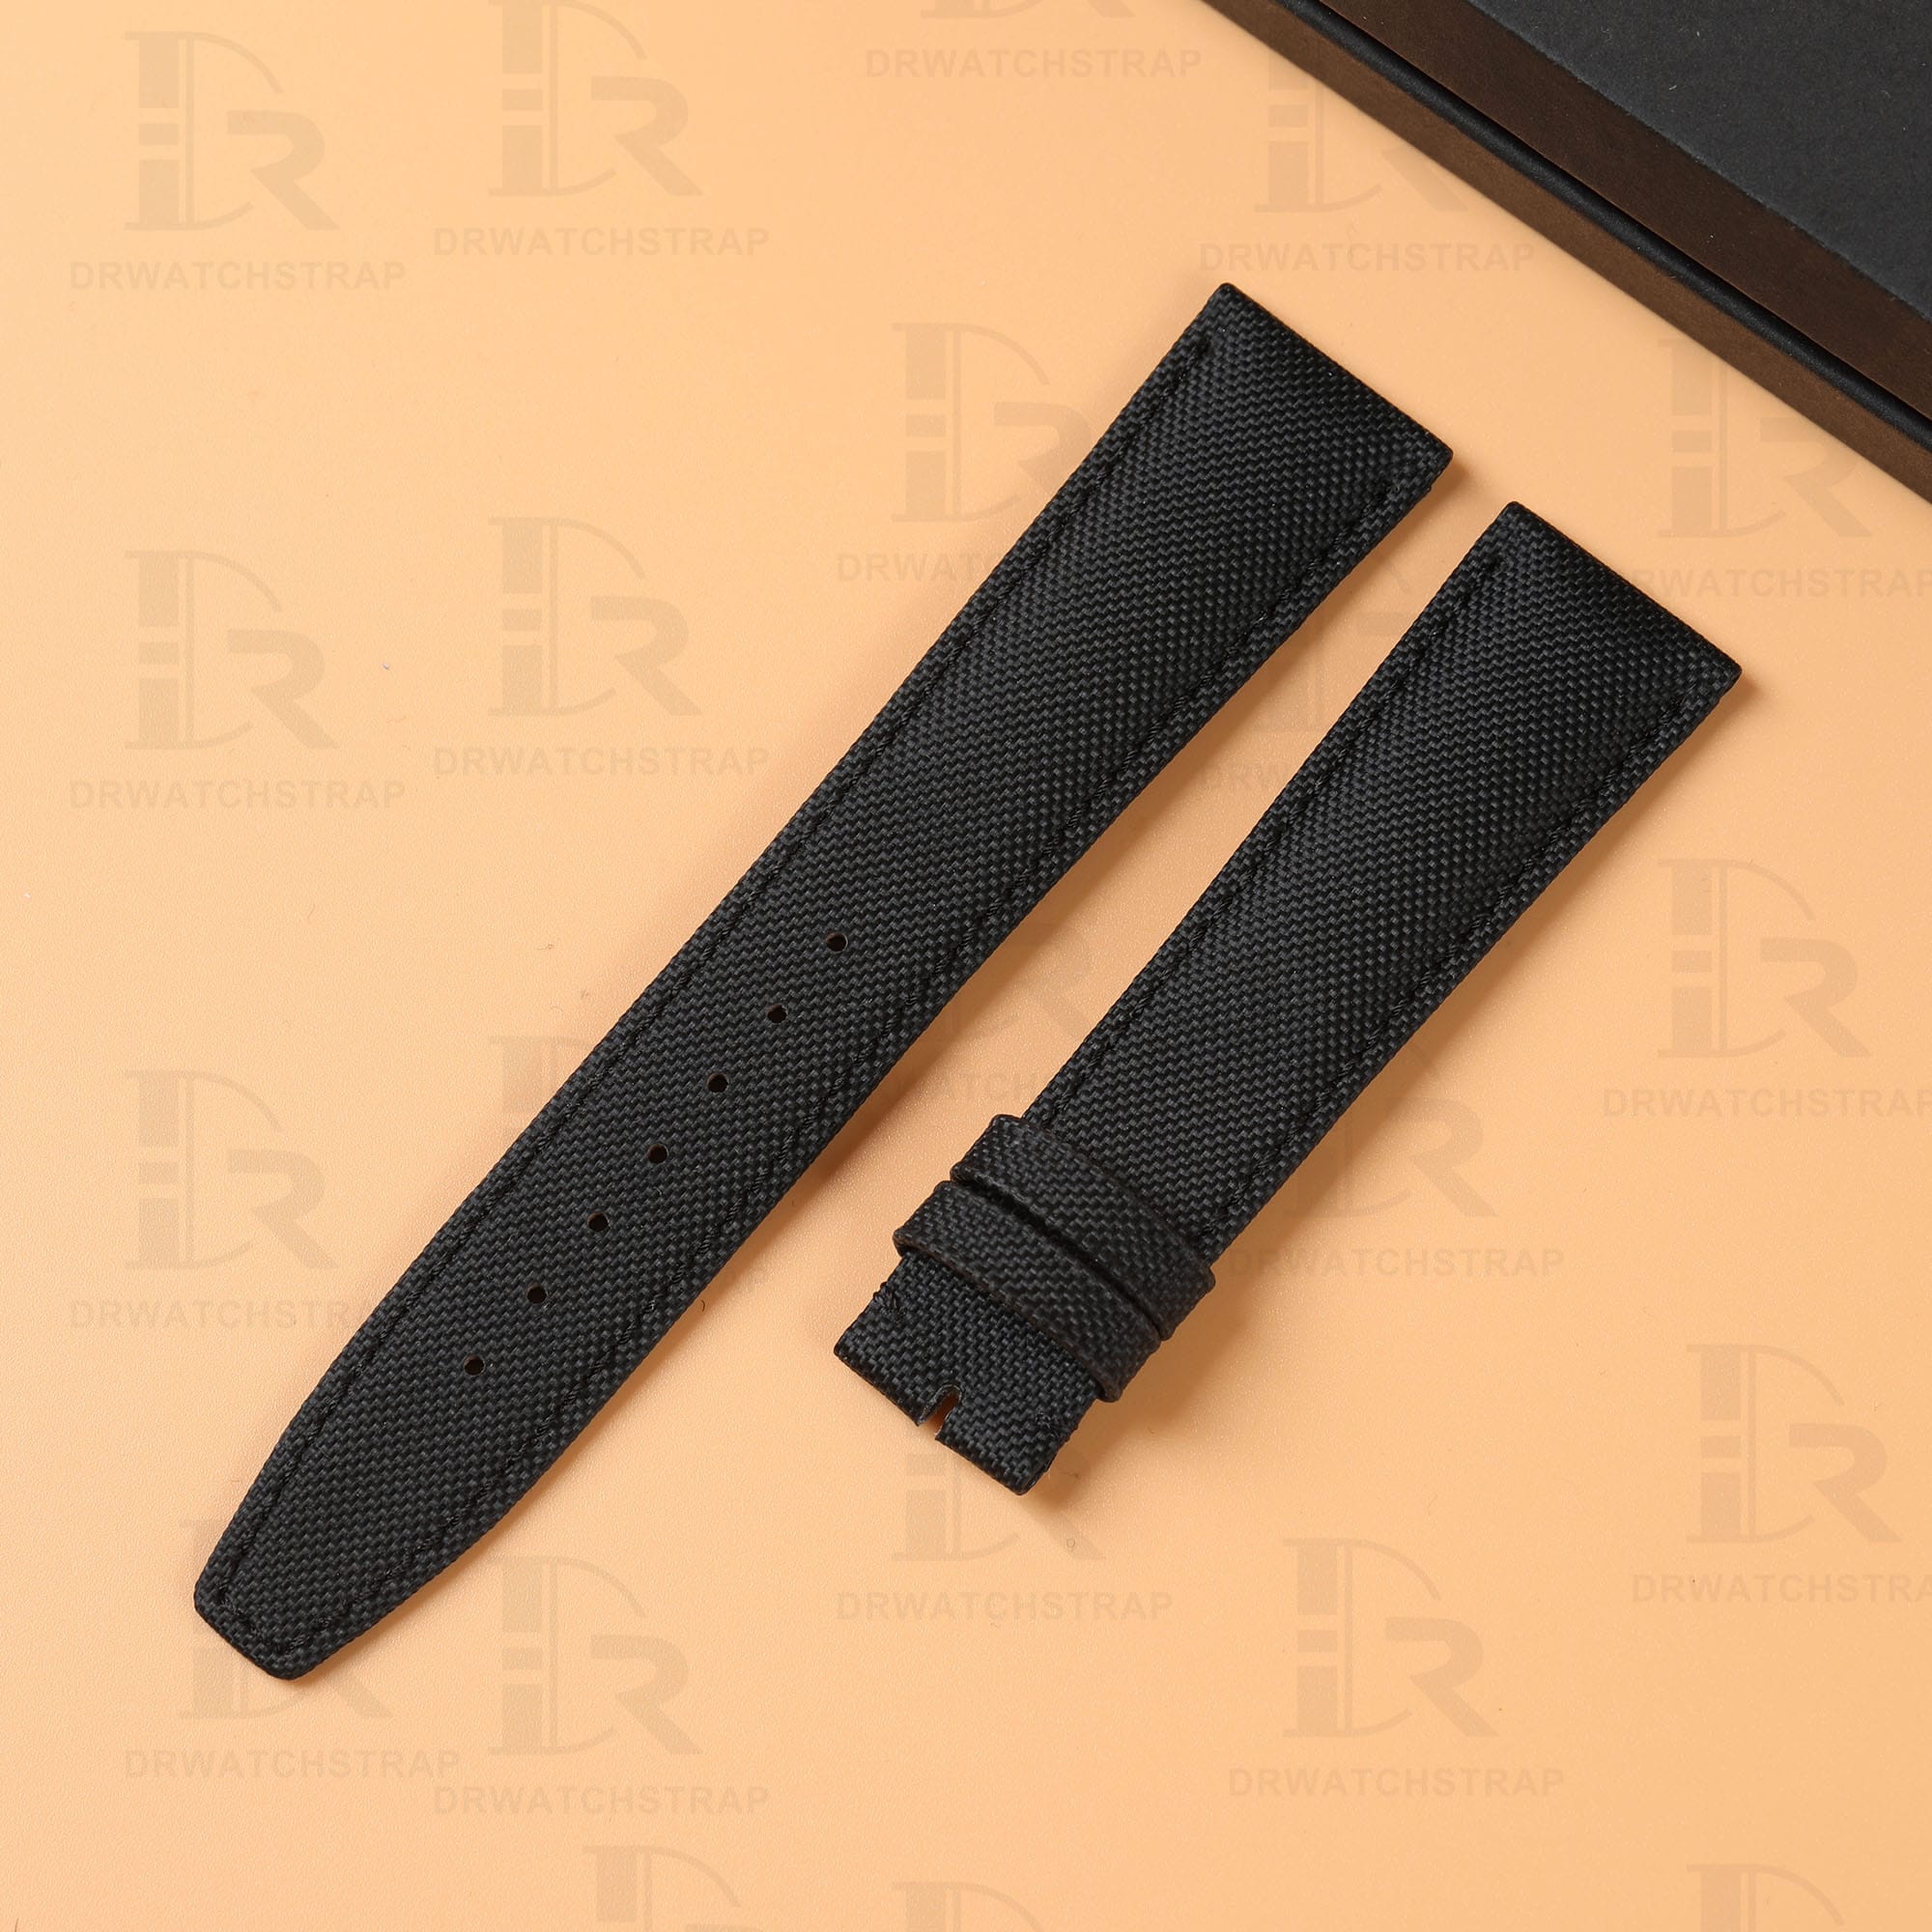 Buy custom IWC Black canvas watch strap 16mm 18mm 20mm 22mm for IWC Portofino / Portuguese / Big Pilot's, replacement watch band for sale